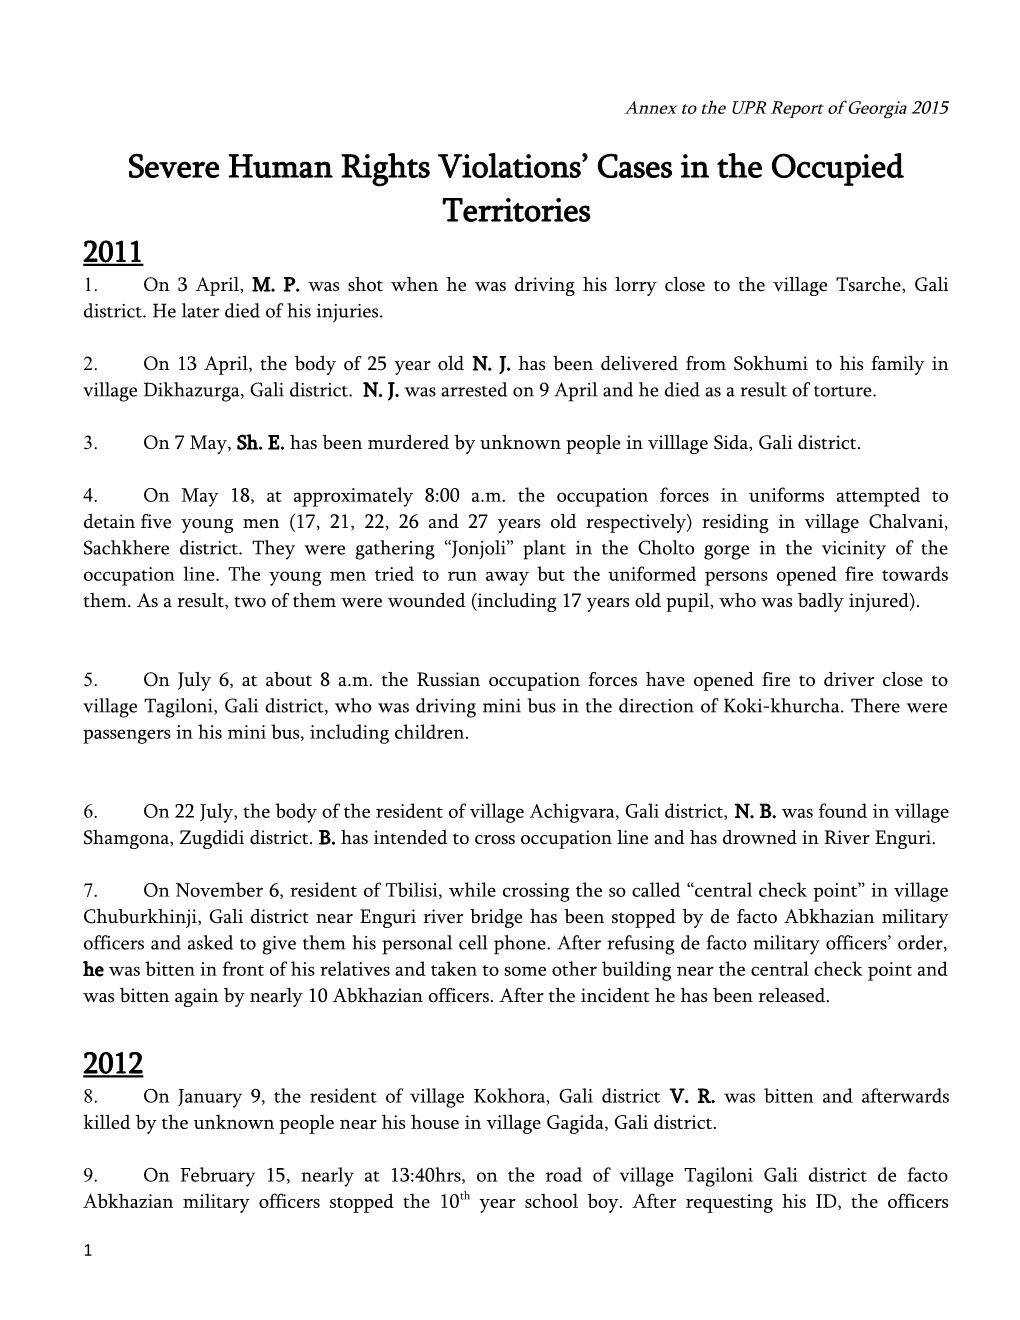 Severe Human Rights Violations Cases in the Occupied Territories